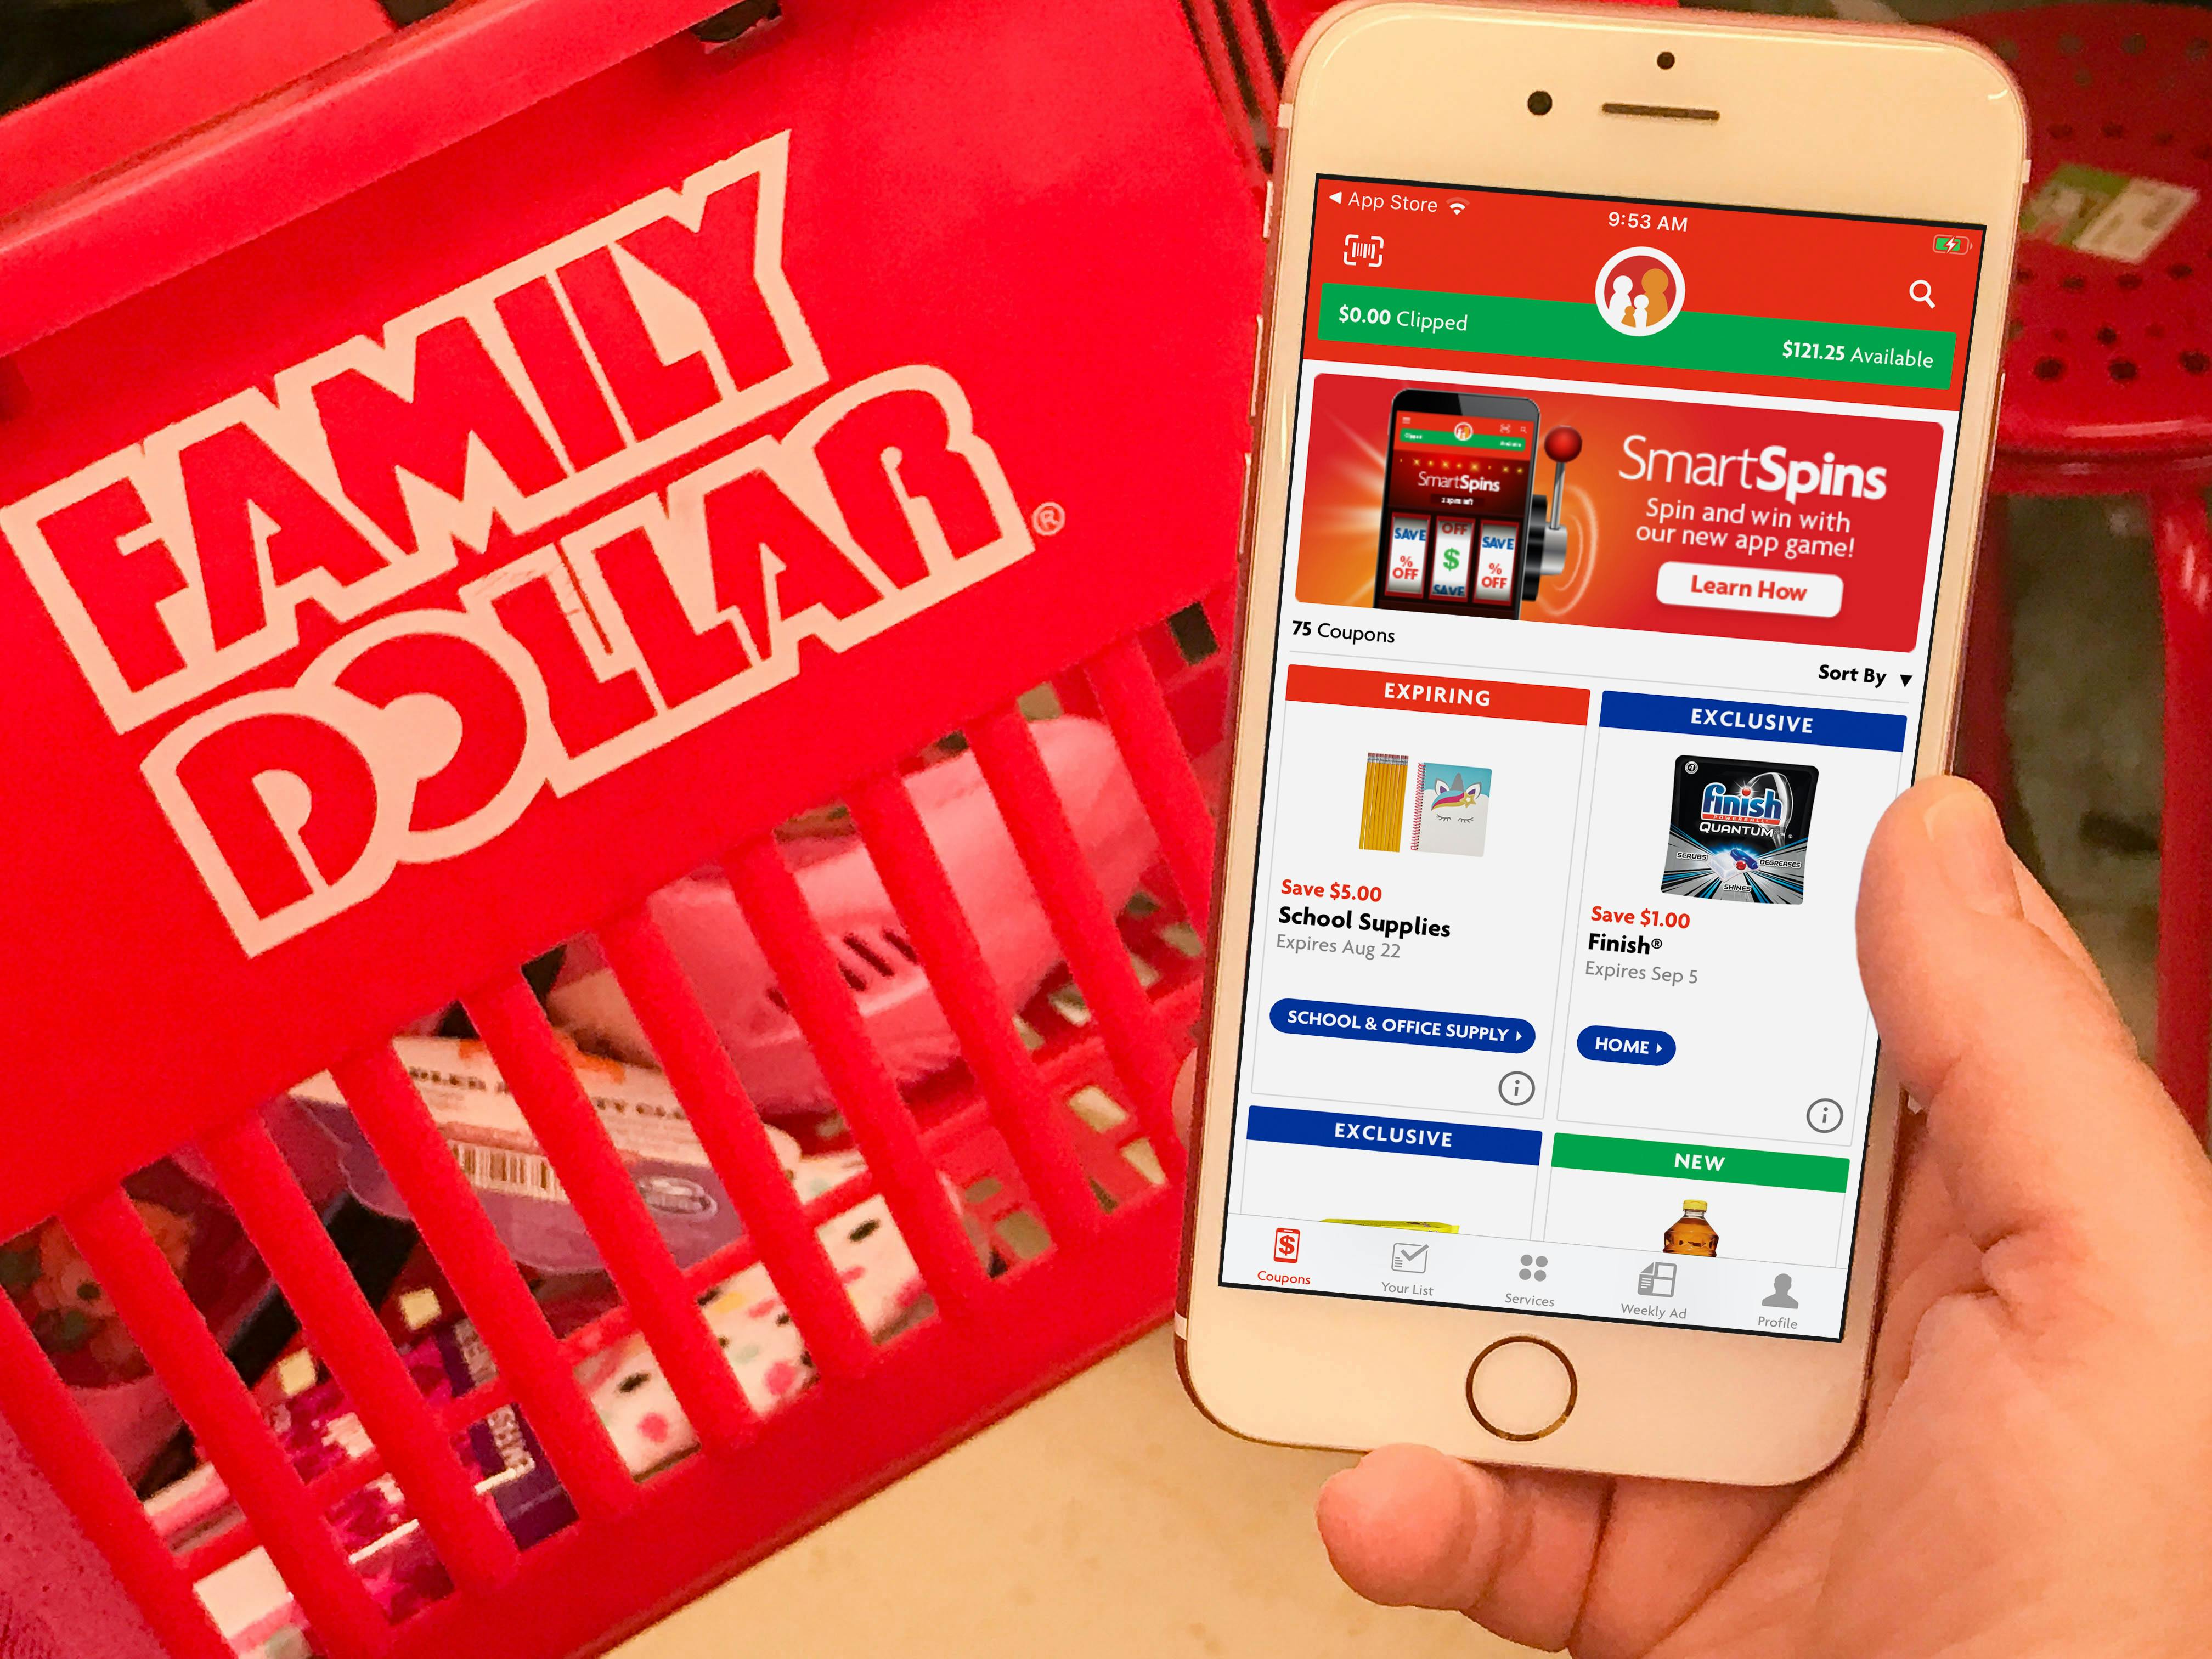 Family dollar app on a iphone next to a family dollar hand basket filled with products.